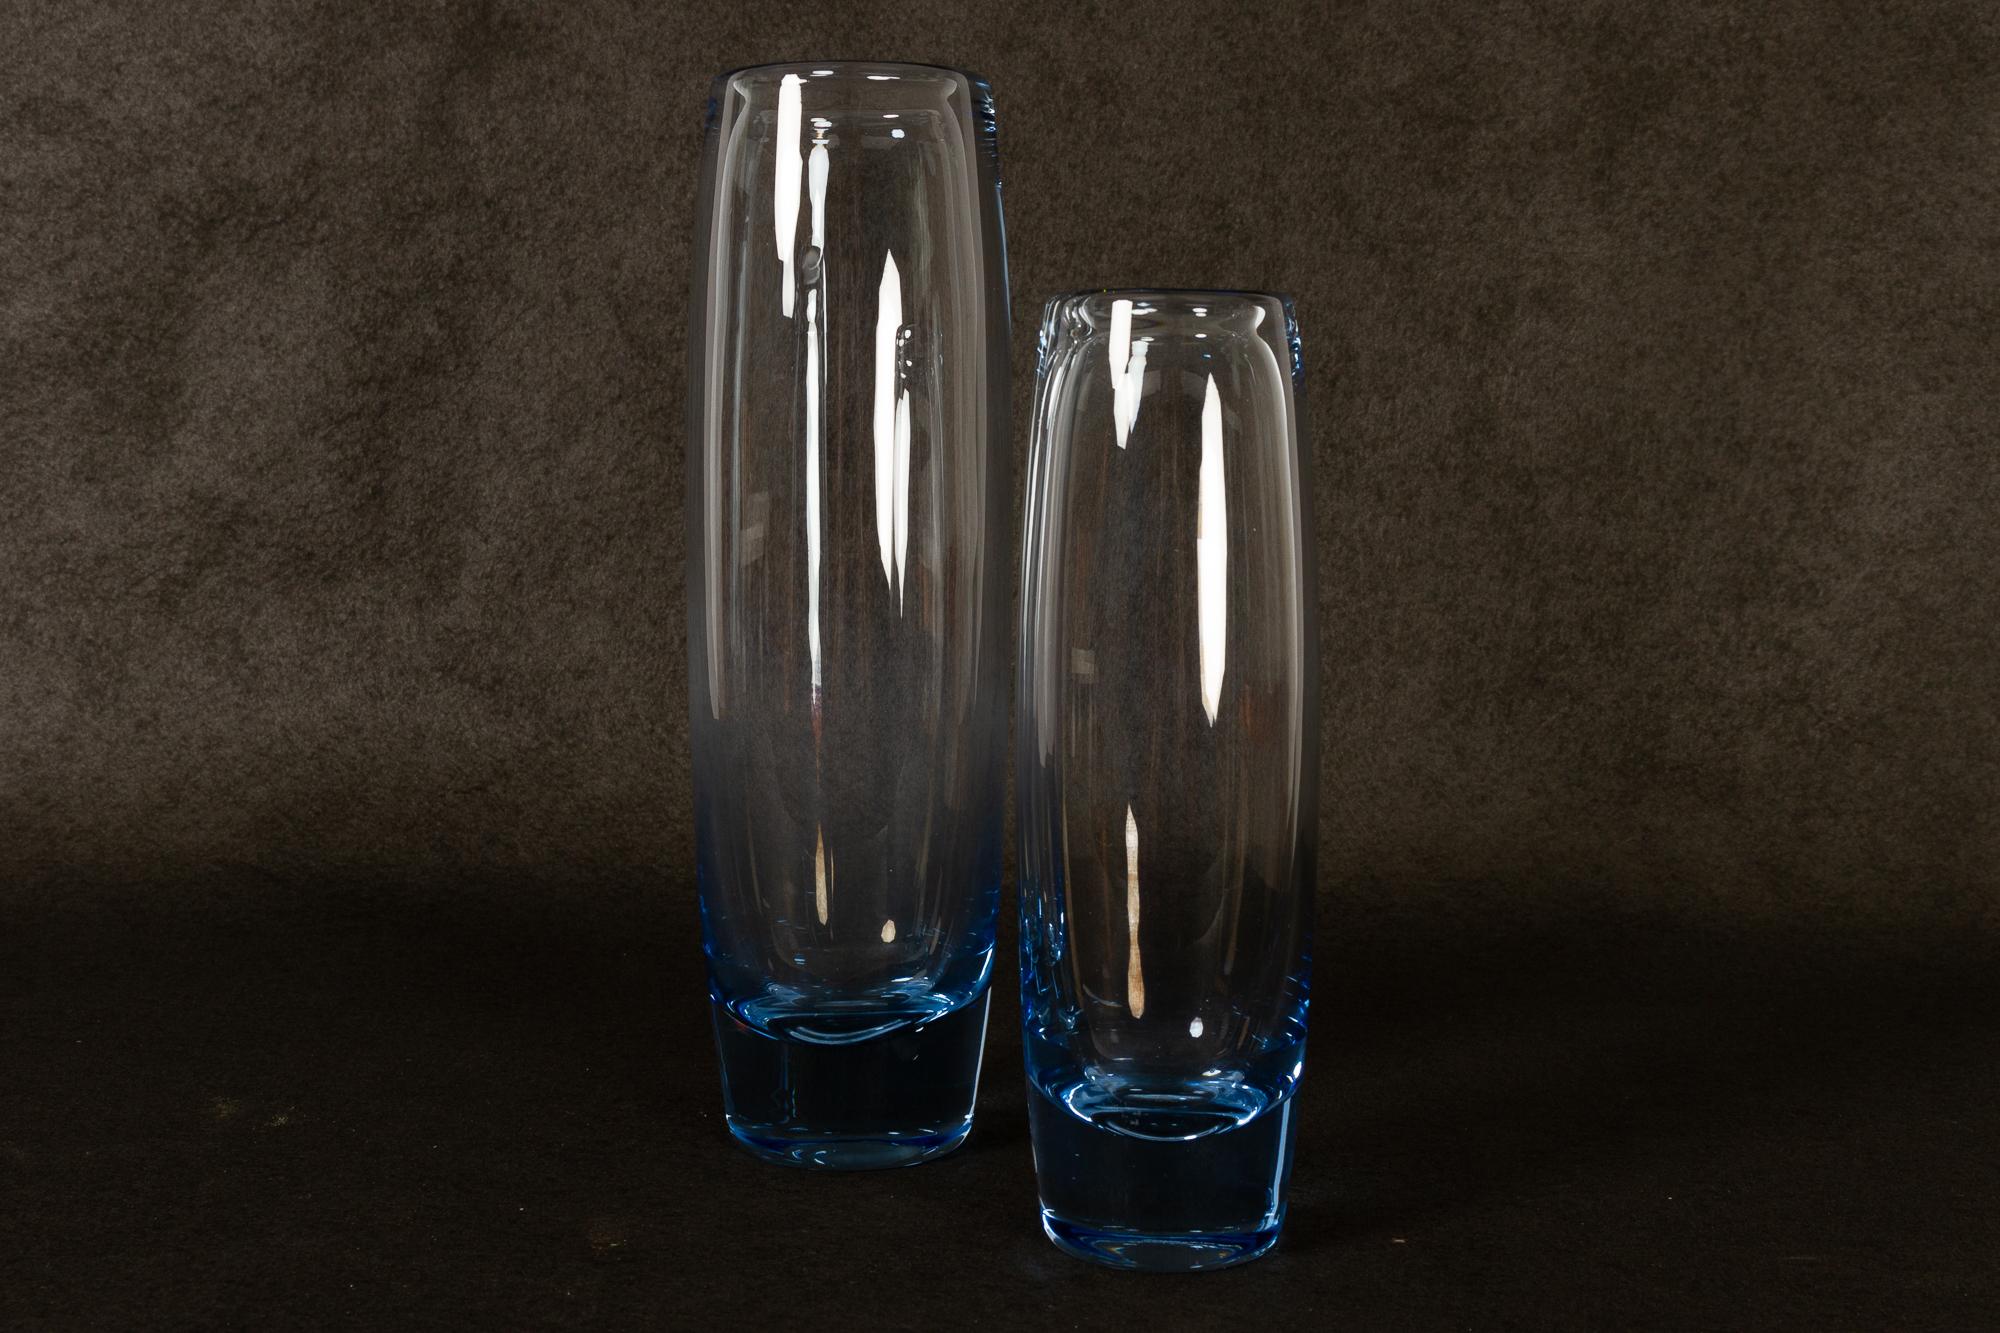 Danish Vvintage glass vases by Per Lütken for Holmegaard 1960s.
Pair of small torpedo shaped vintage vases in hand blown aqua blue glass designed by Danish designer Per Lütken in 1963.
Makers mark and artists initials etched in the bottom along